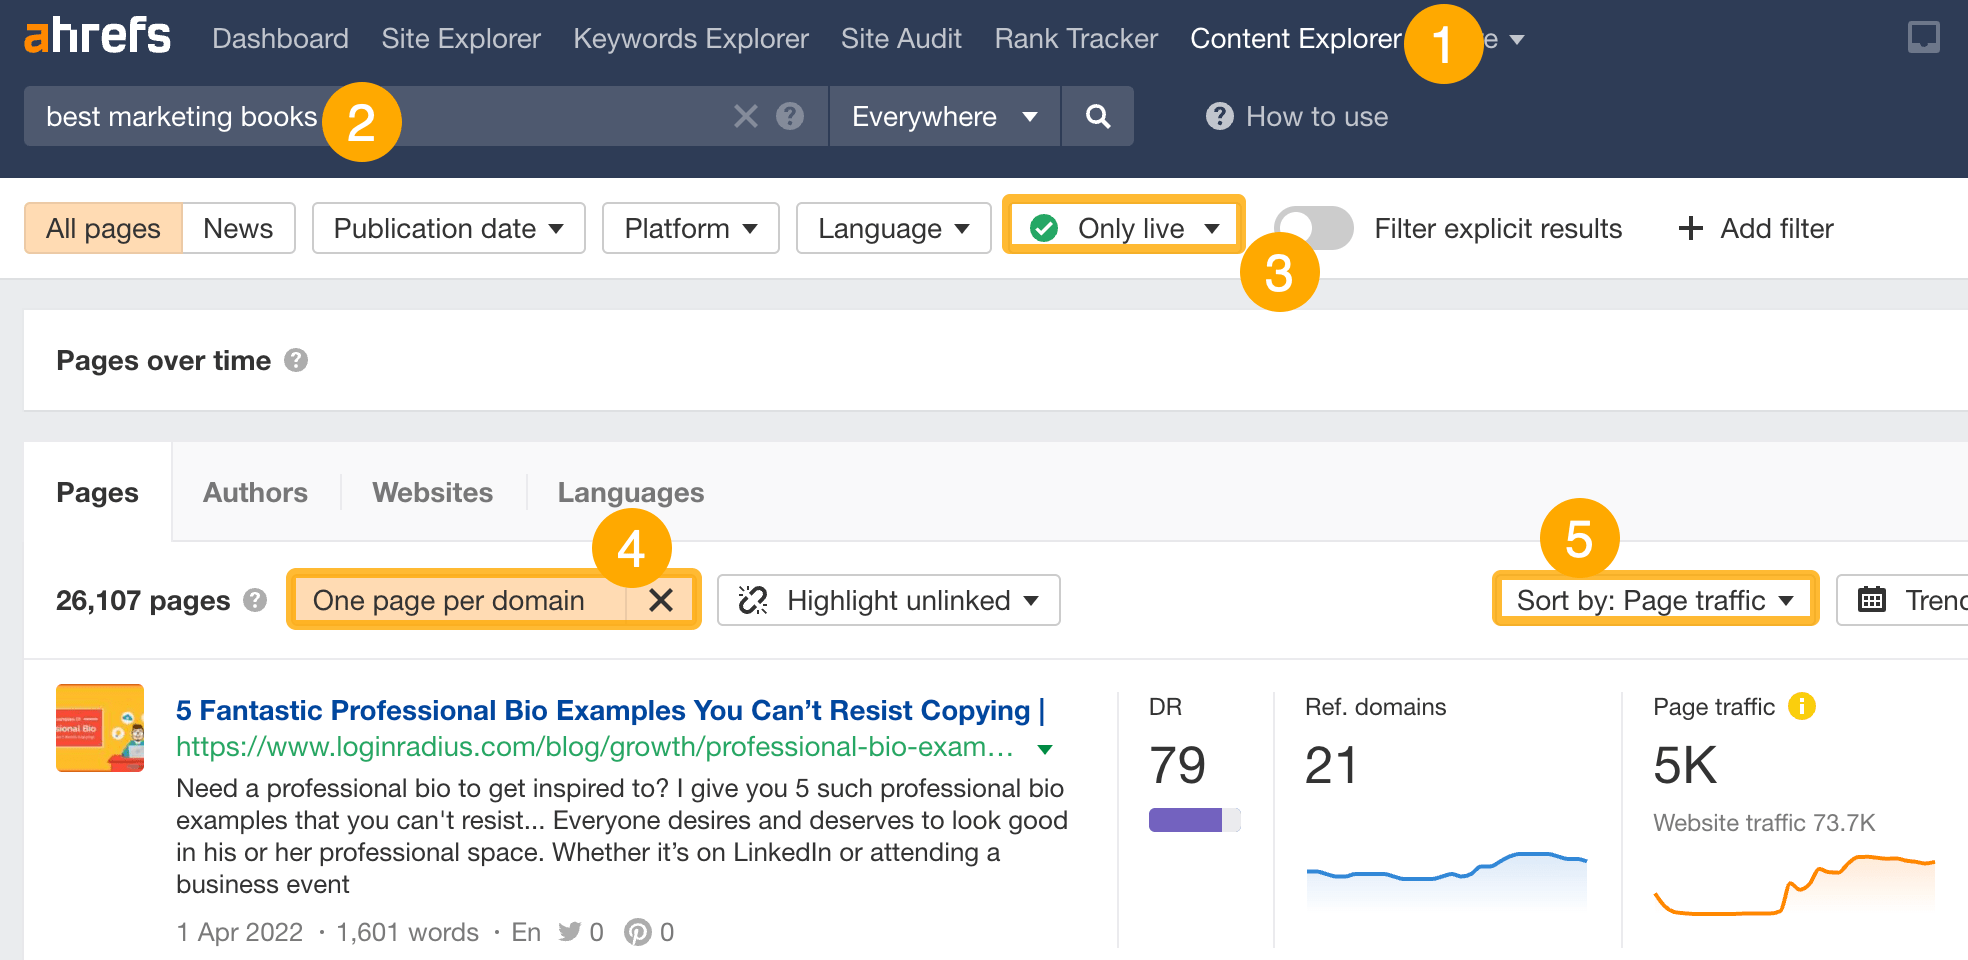 How to find book lists to promote to, via Ahrefs' Content Explorer
